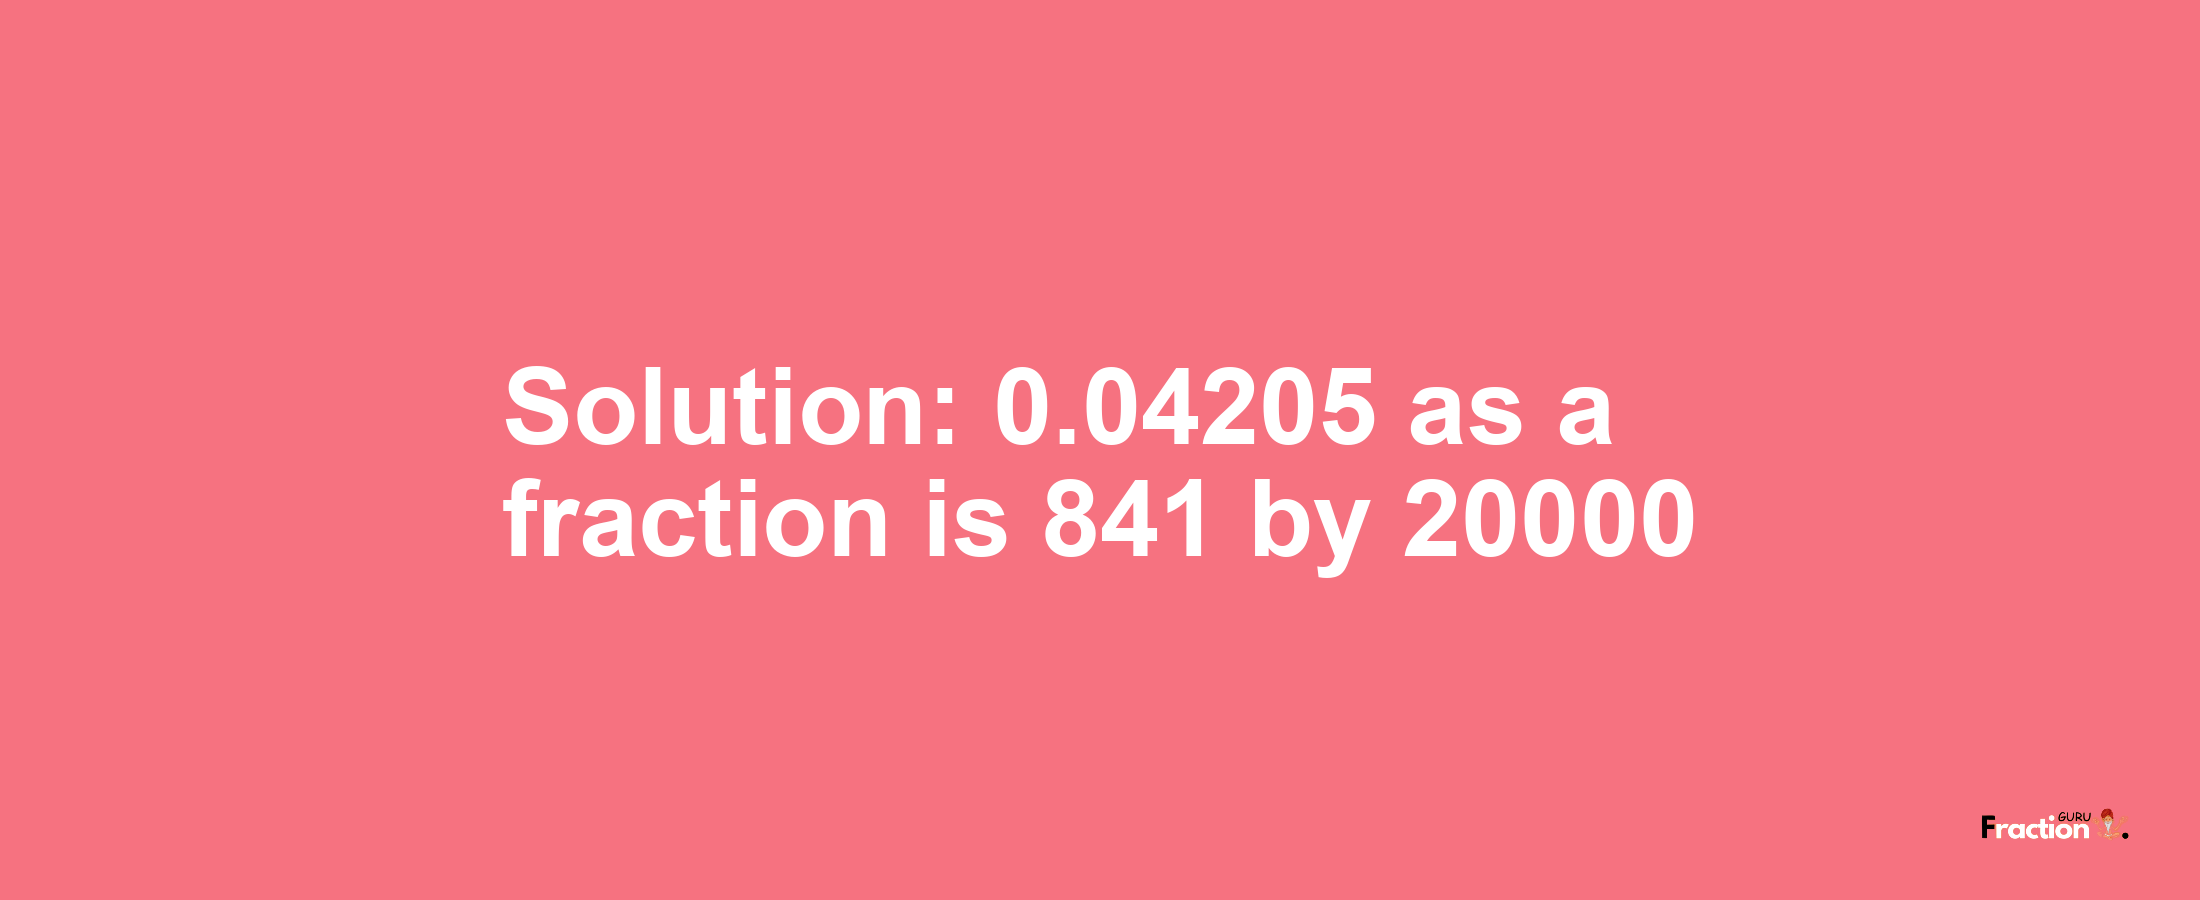 Solution:0.04205 as a fraction is 841/20000